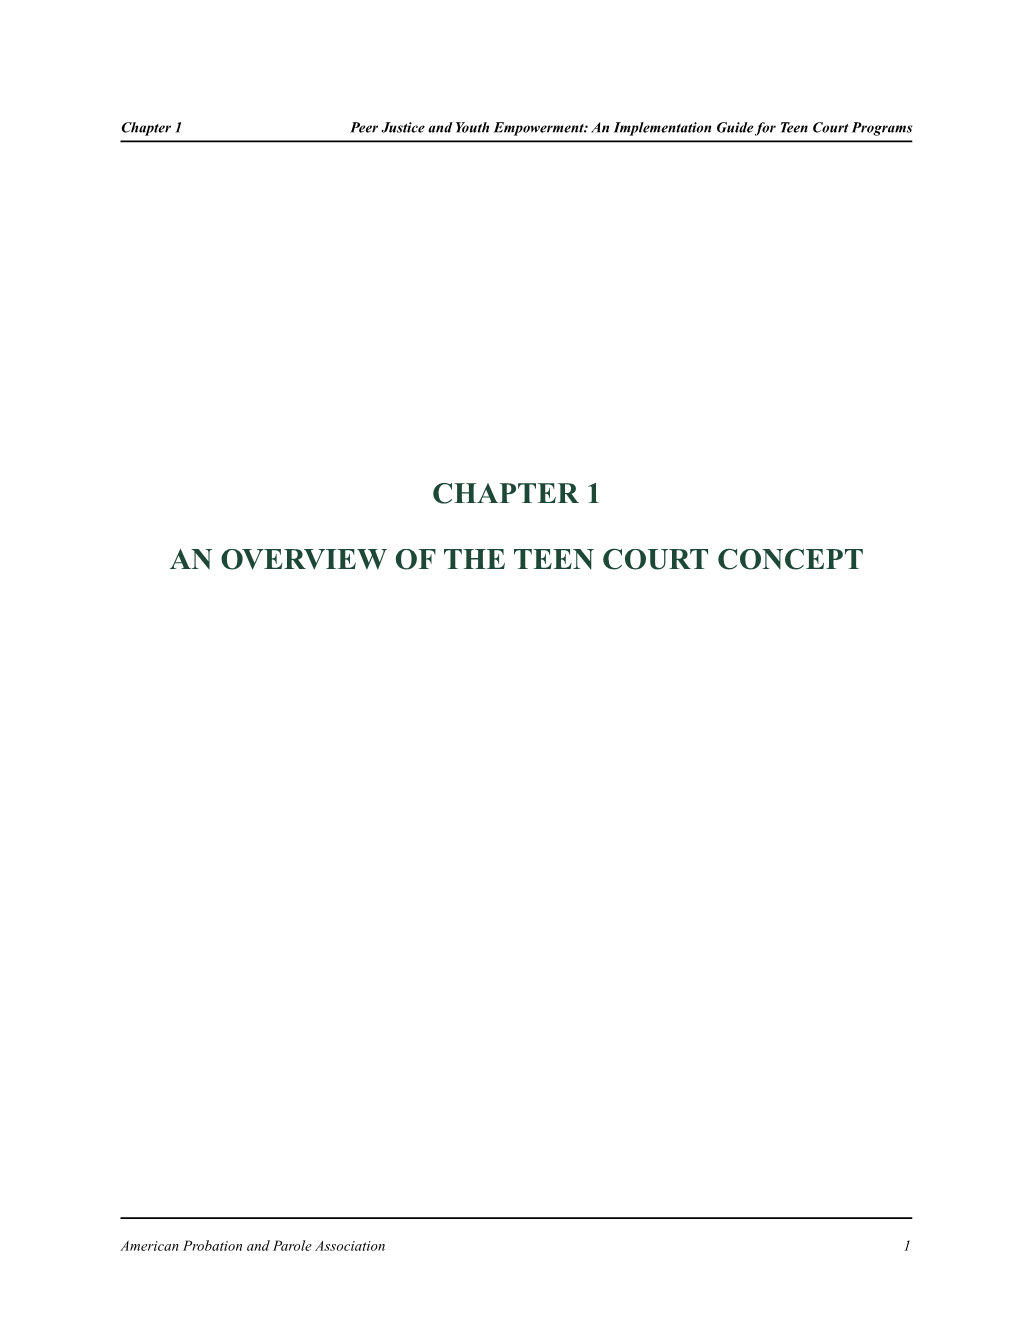 Chapter 1 an Overview of the Teen Court Concept